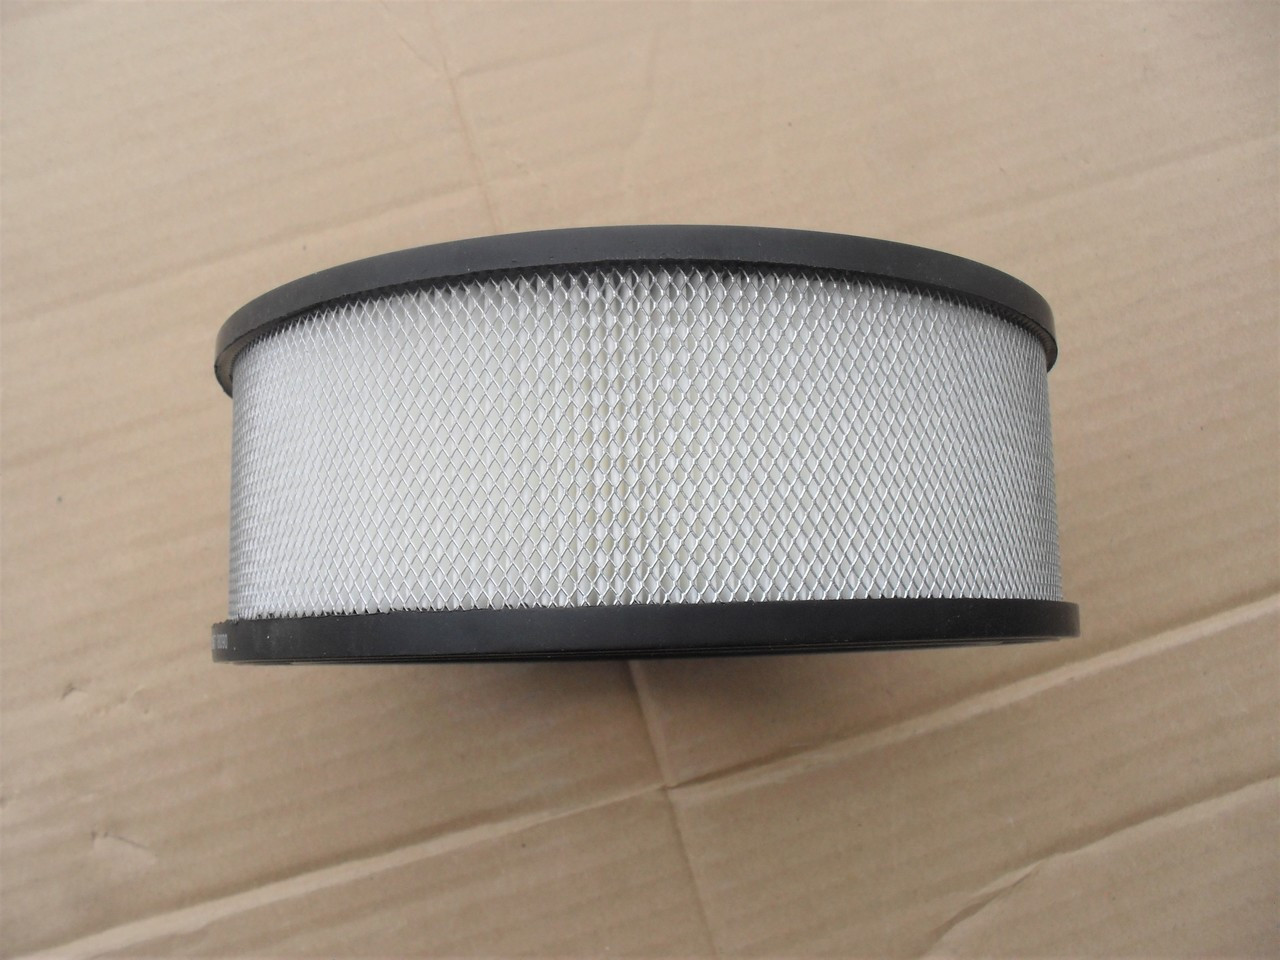 Air Filter for Kohler Command CH18 to CH25 CV17 to CV23 K241 K301 K321 K341 K361 K532 K582 4708303 4708303S 4708303S1 4788303 4788303S 4788303S1 47 083 03 47 083 03-S 47 083 03-S1 47 883 03 47 883 03-S 47 883 03-S1